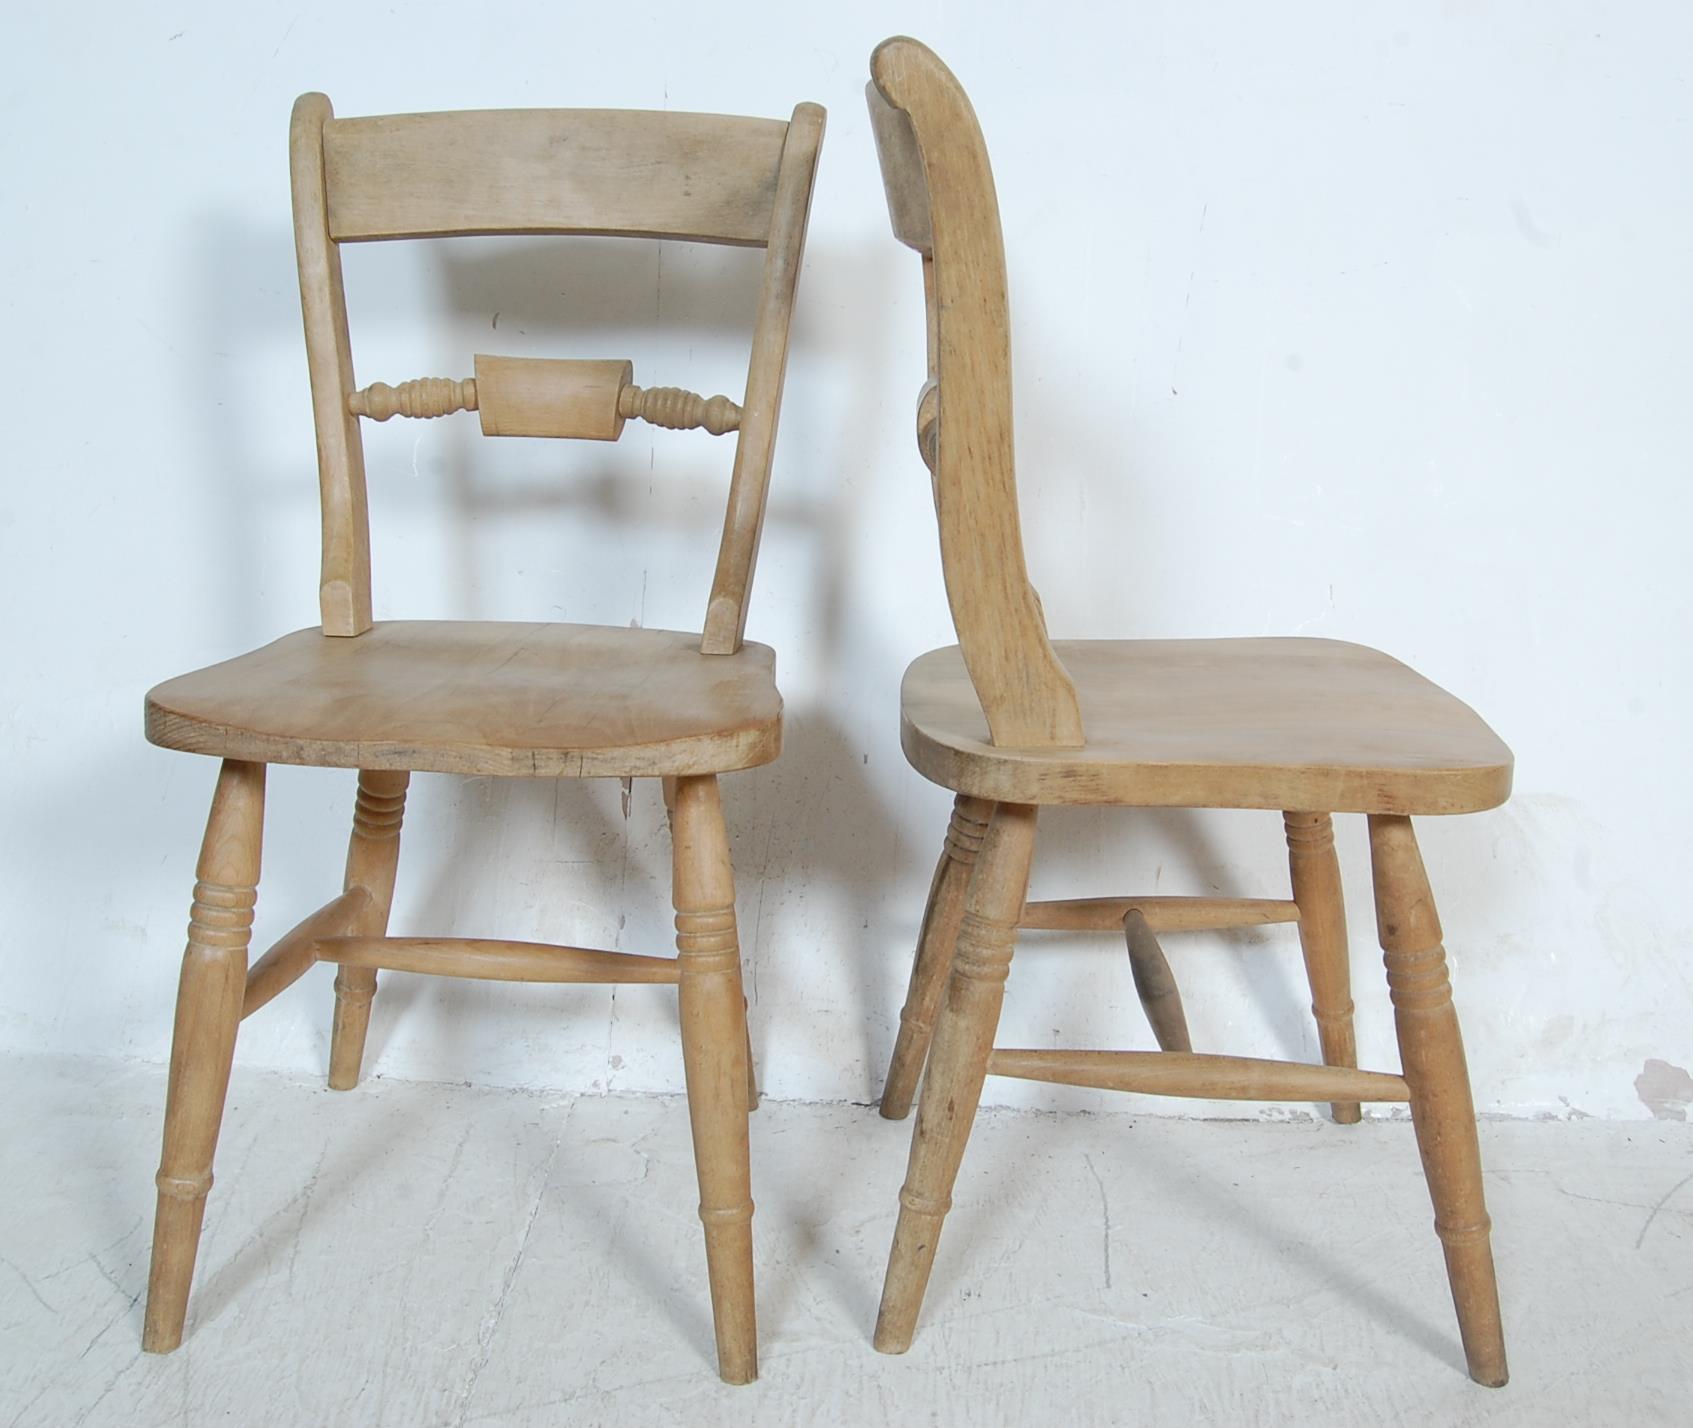 SIX VICTORIAN STYLE DINING CHAIRS - Image 4 of 5